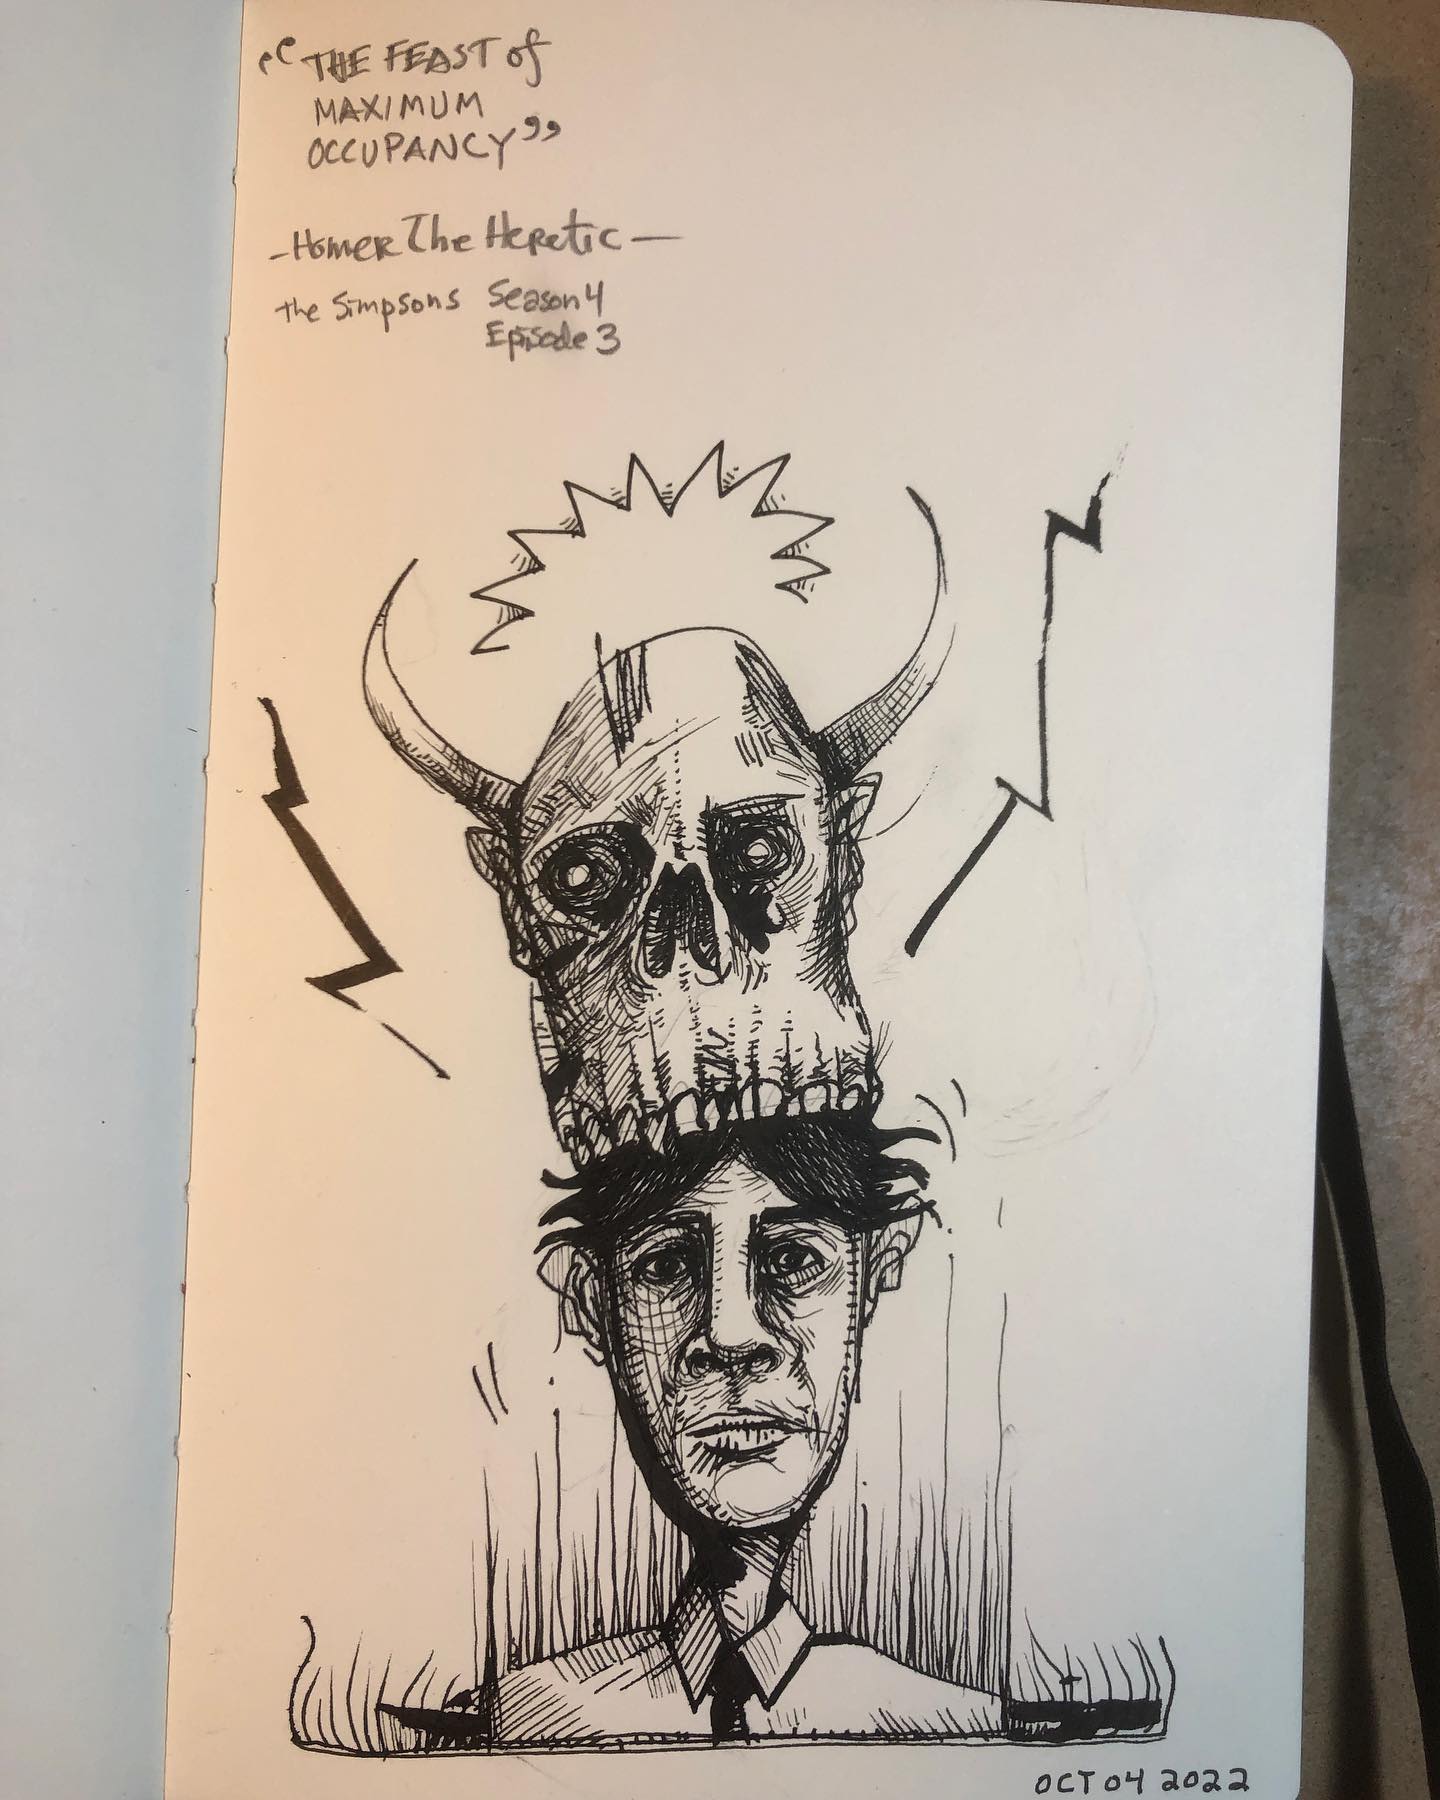 Ink drawing of a skull munching on the head of a human